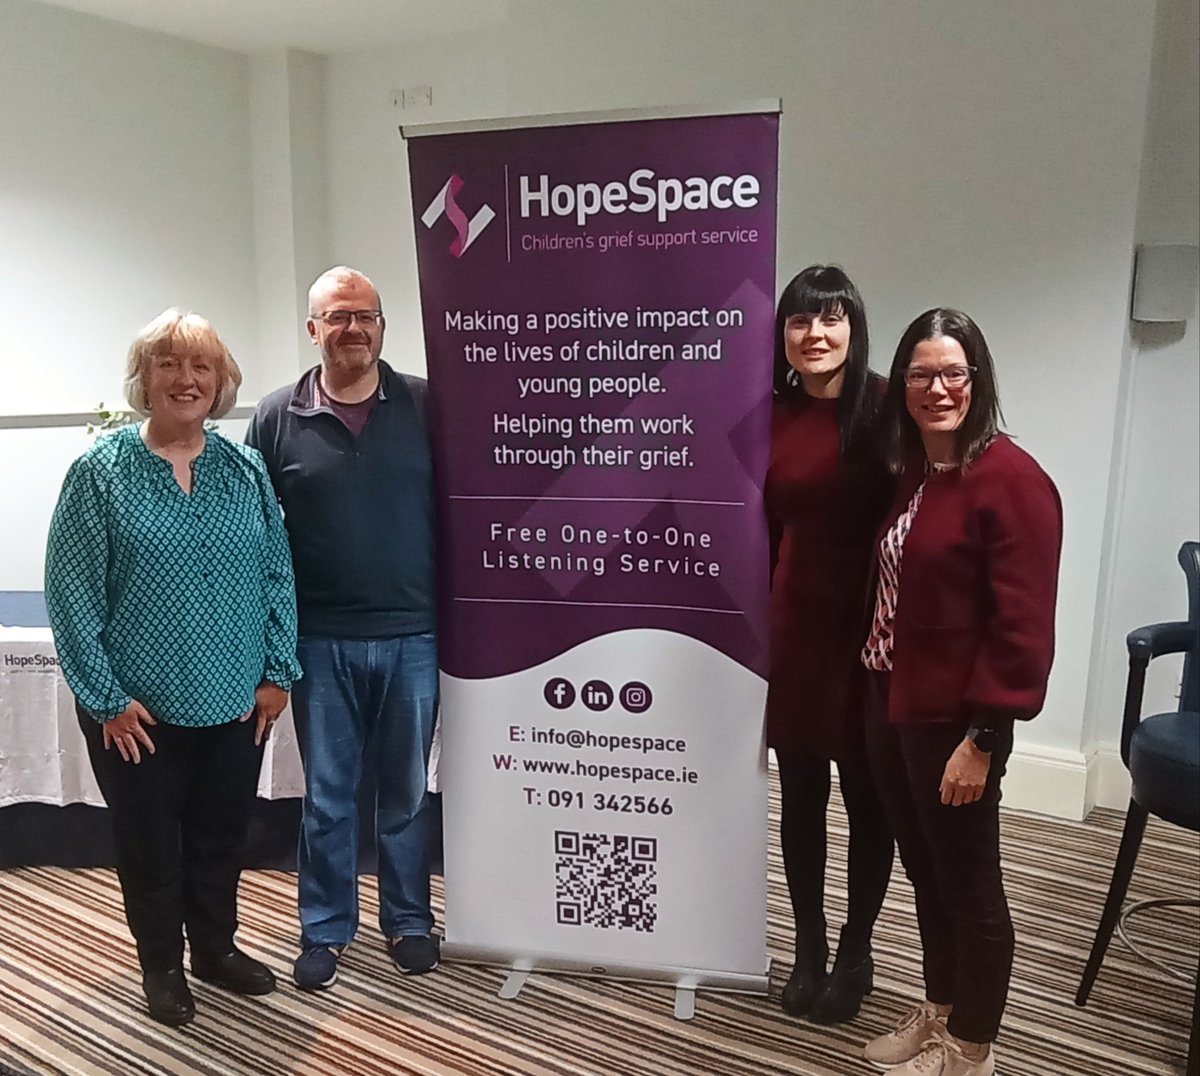 Captivating public talk on strategies for supporting grieving children hosted by HopeSpace (Children's Grief Support Service Galway) @saoltagroup @doniegill @Shapesofgrief Bereavement Liaison Officer - Vivian Roche -Fahy, Senior Social worker - Martina Kinnane